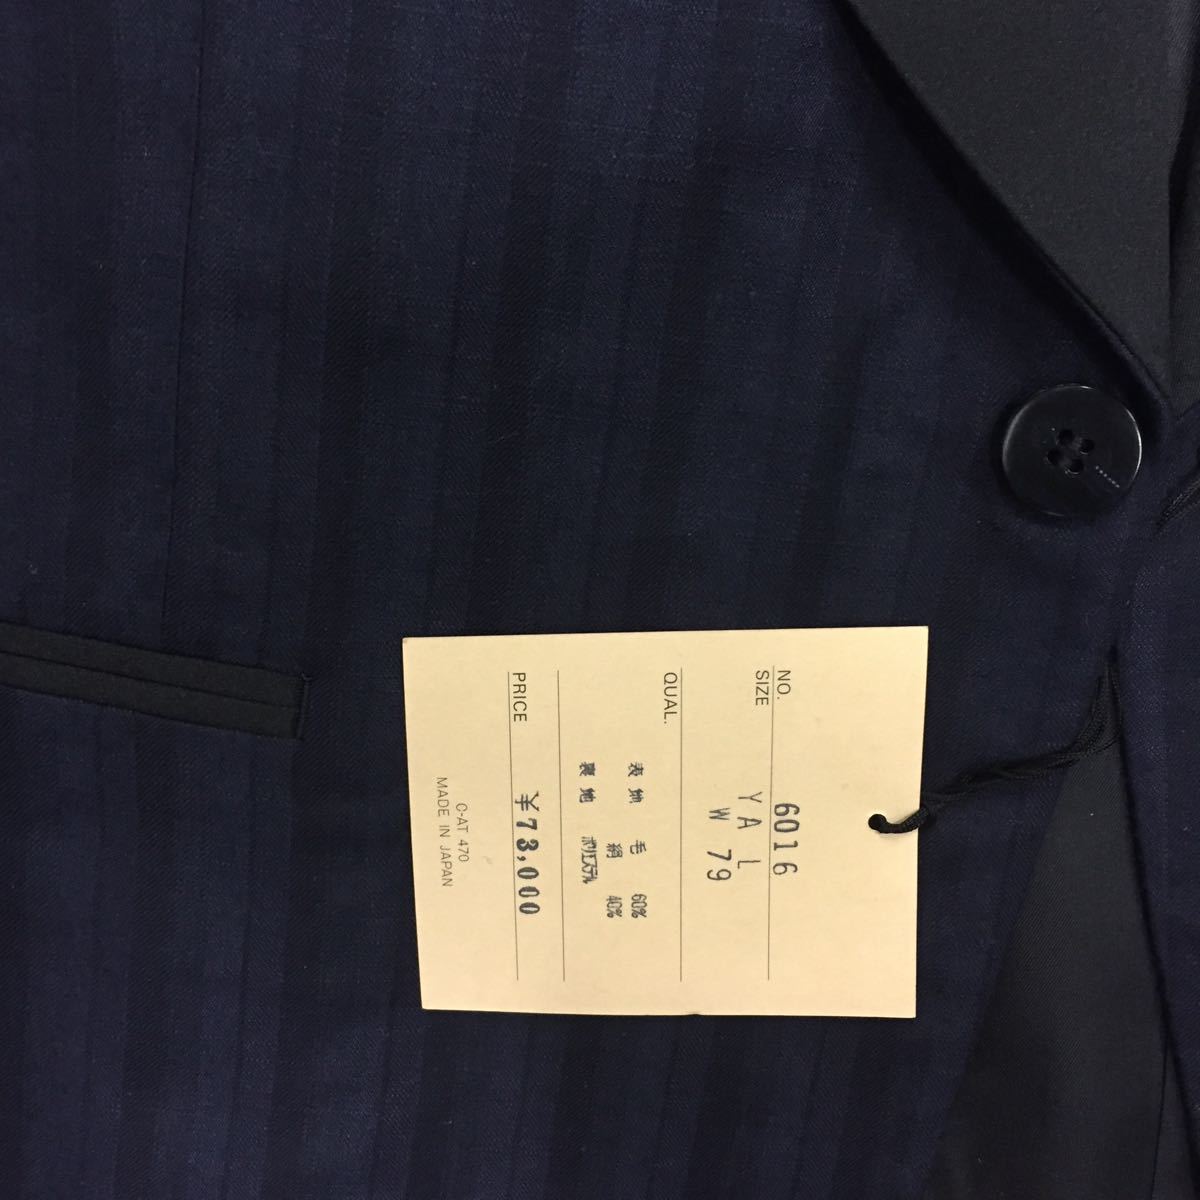  new goods super-discount tag attaching 73,000 jpy tuxedo jacket large size size L blue group dressing up gradation weave pattern made in Japan wool 100% largish 